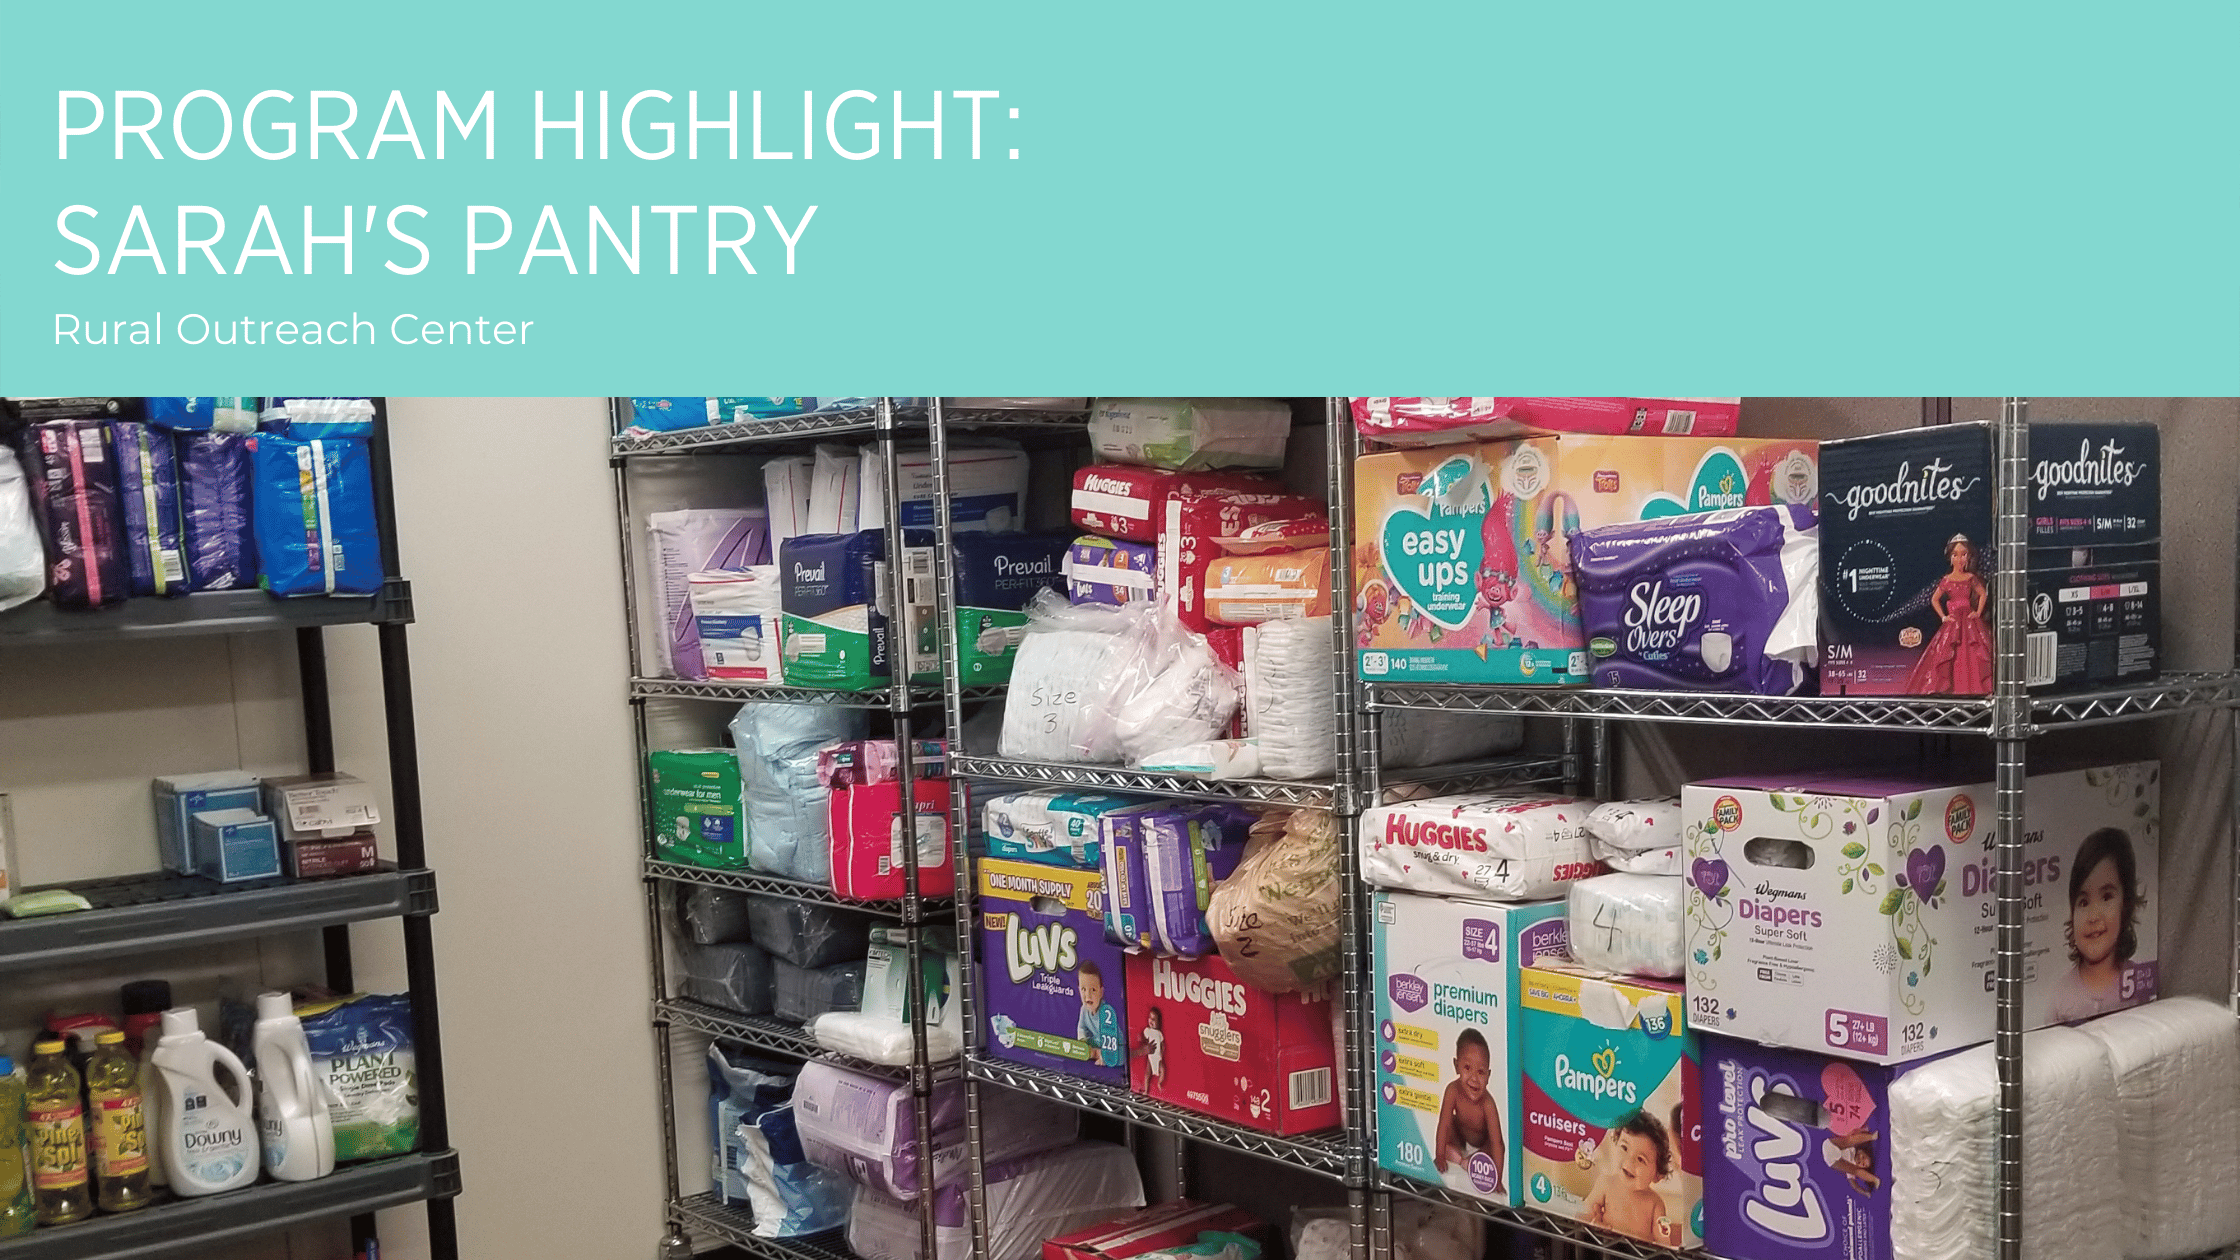 Sarah's Pantry shelves, filled with personal care items